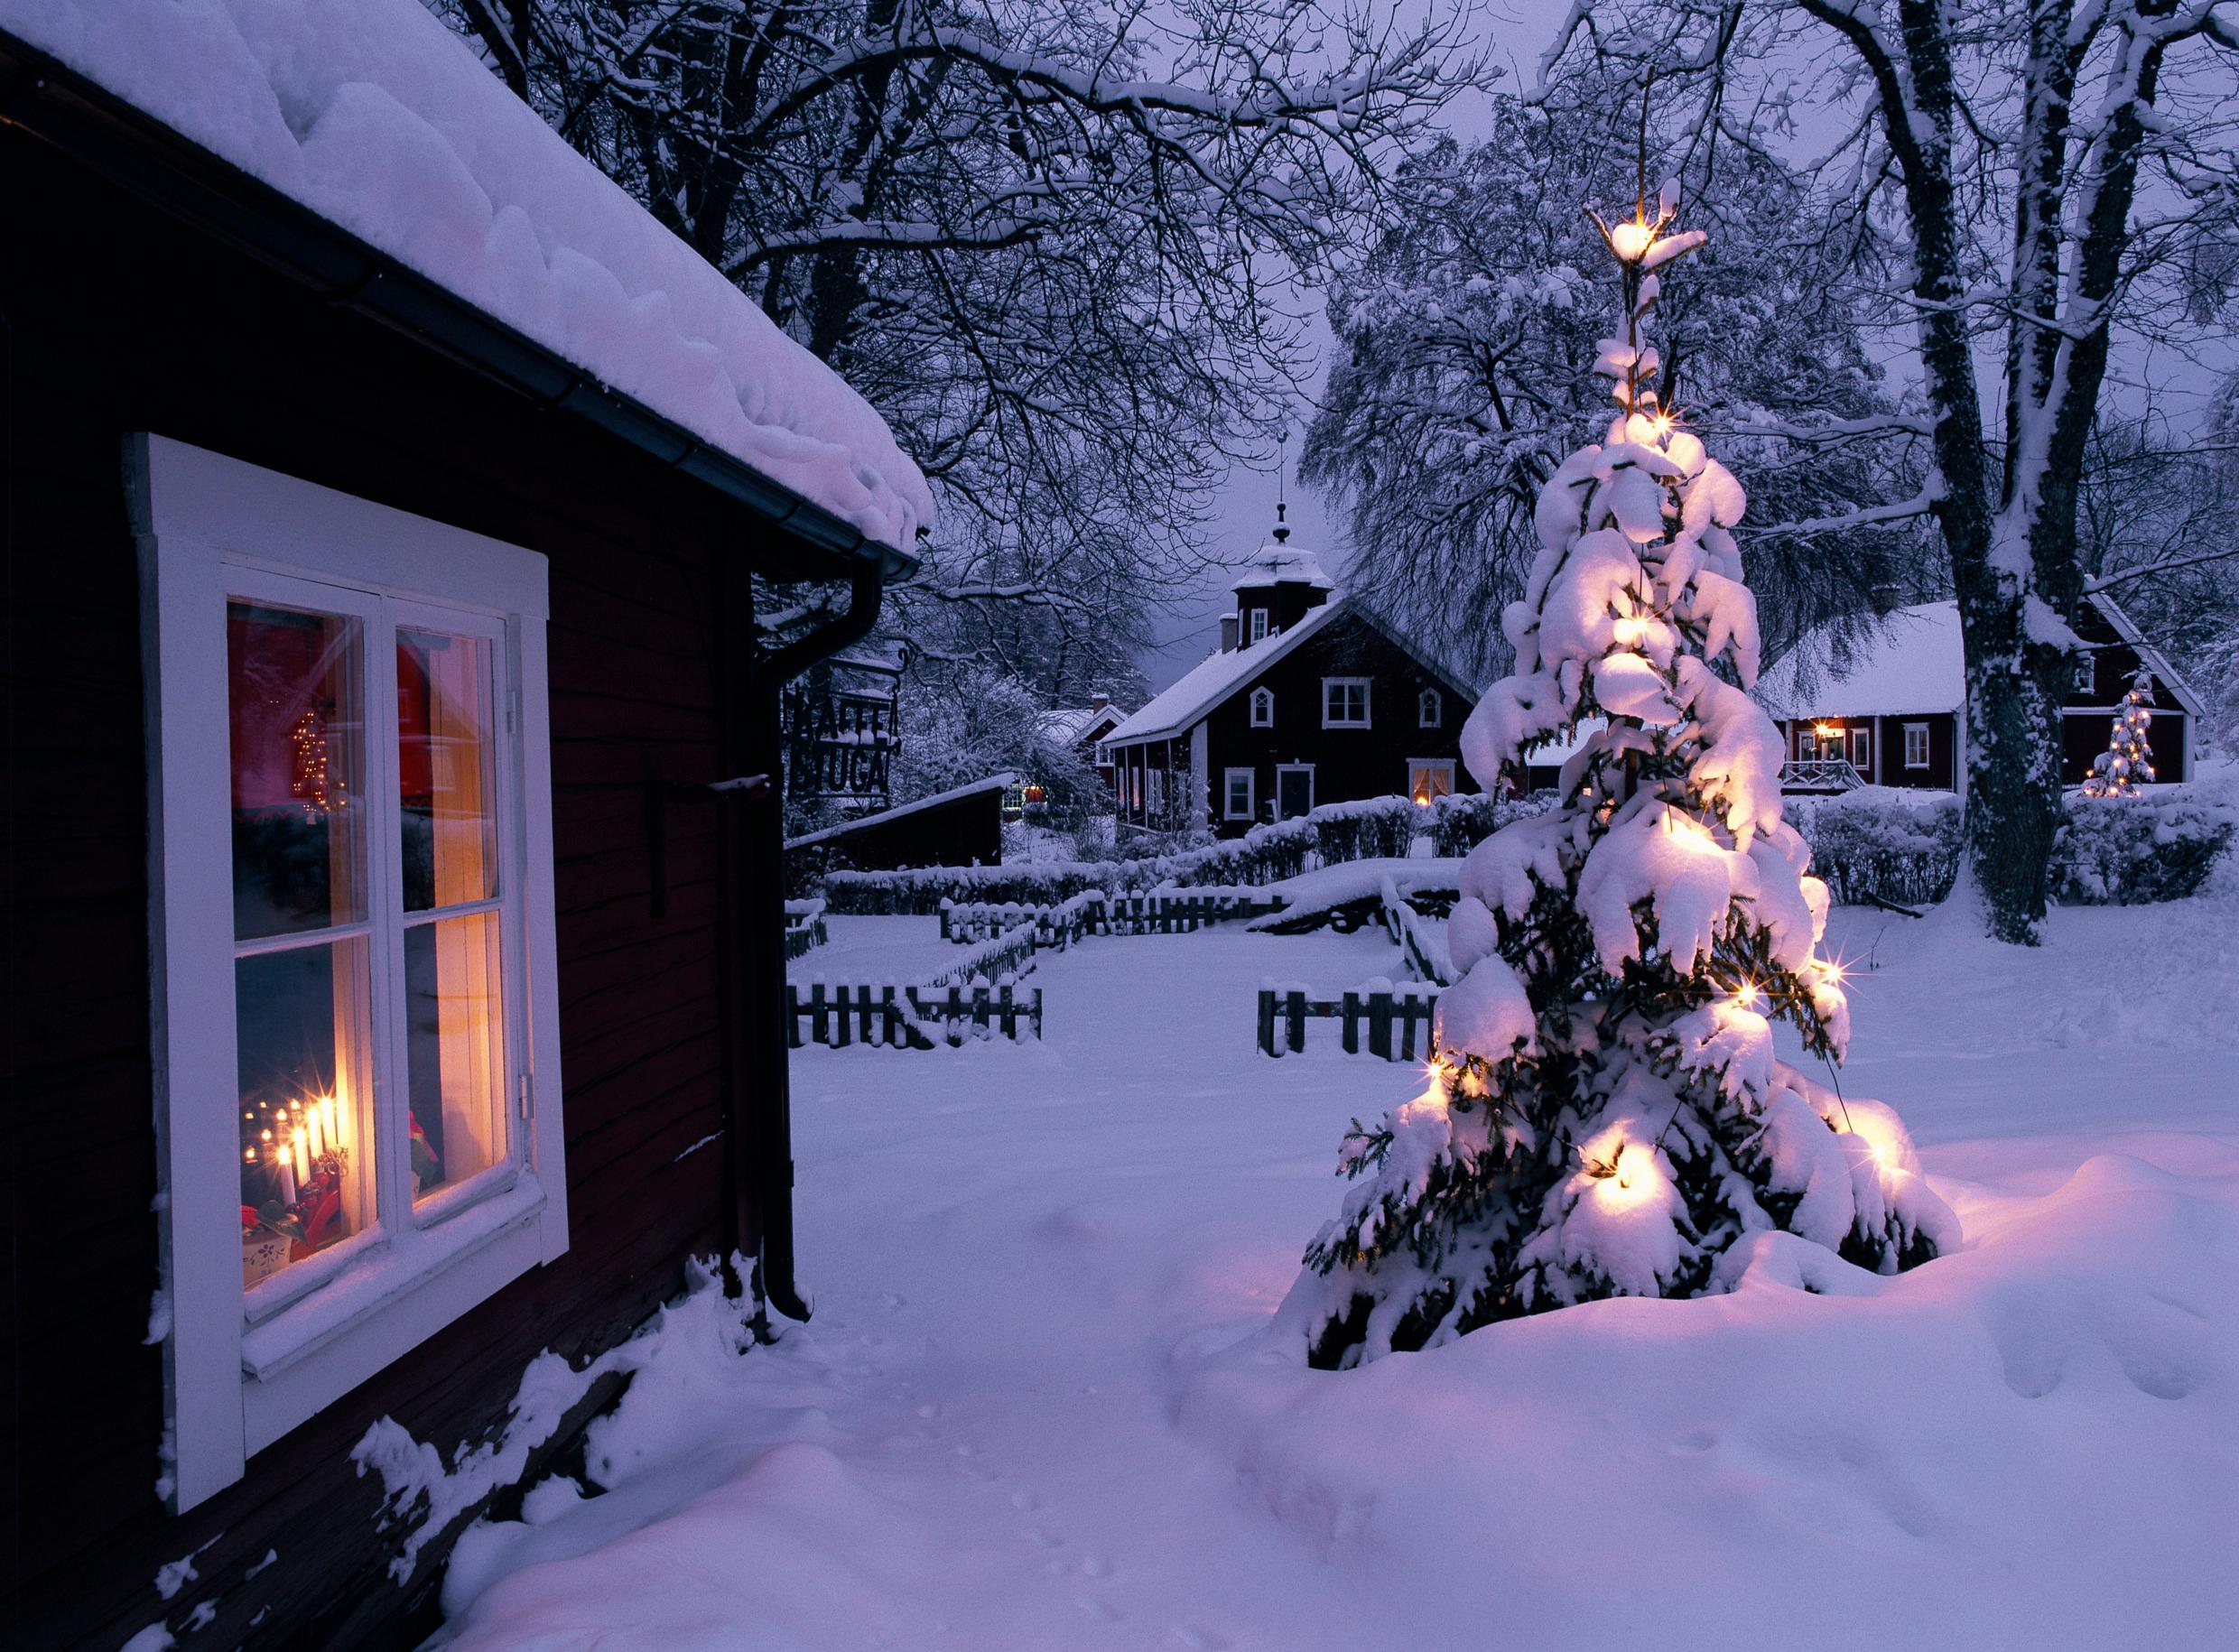 A house with a Christmas tree outside in a snowy landscape.